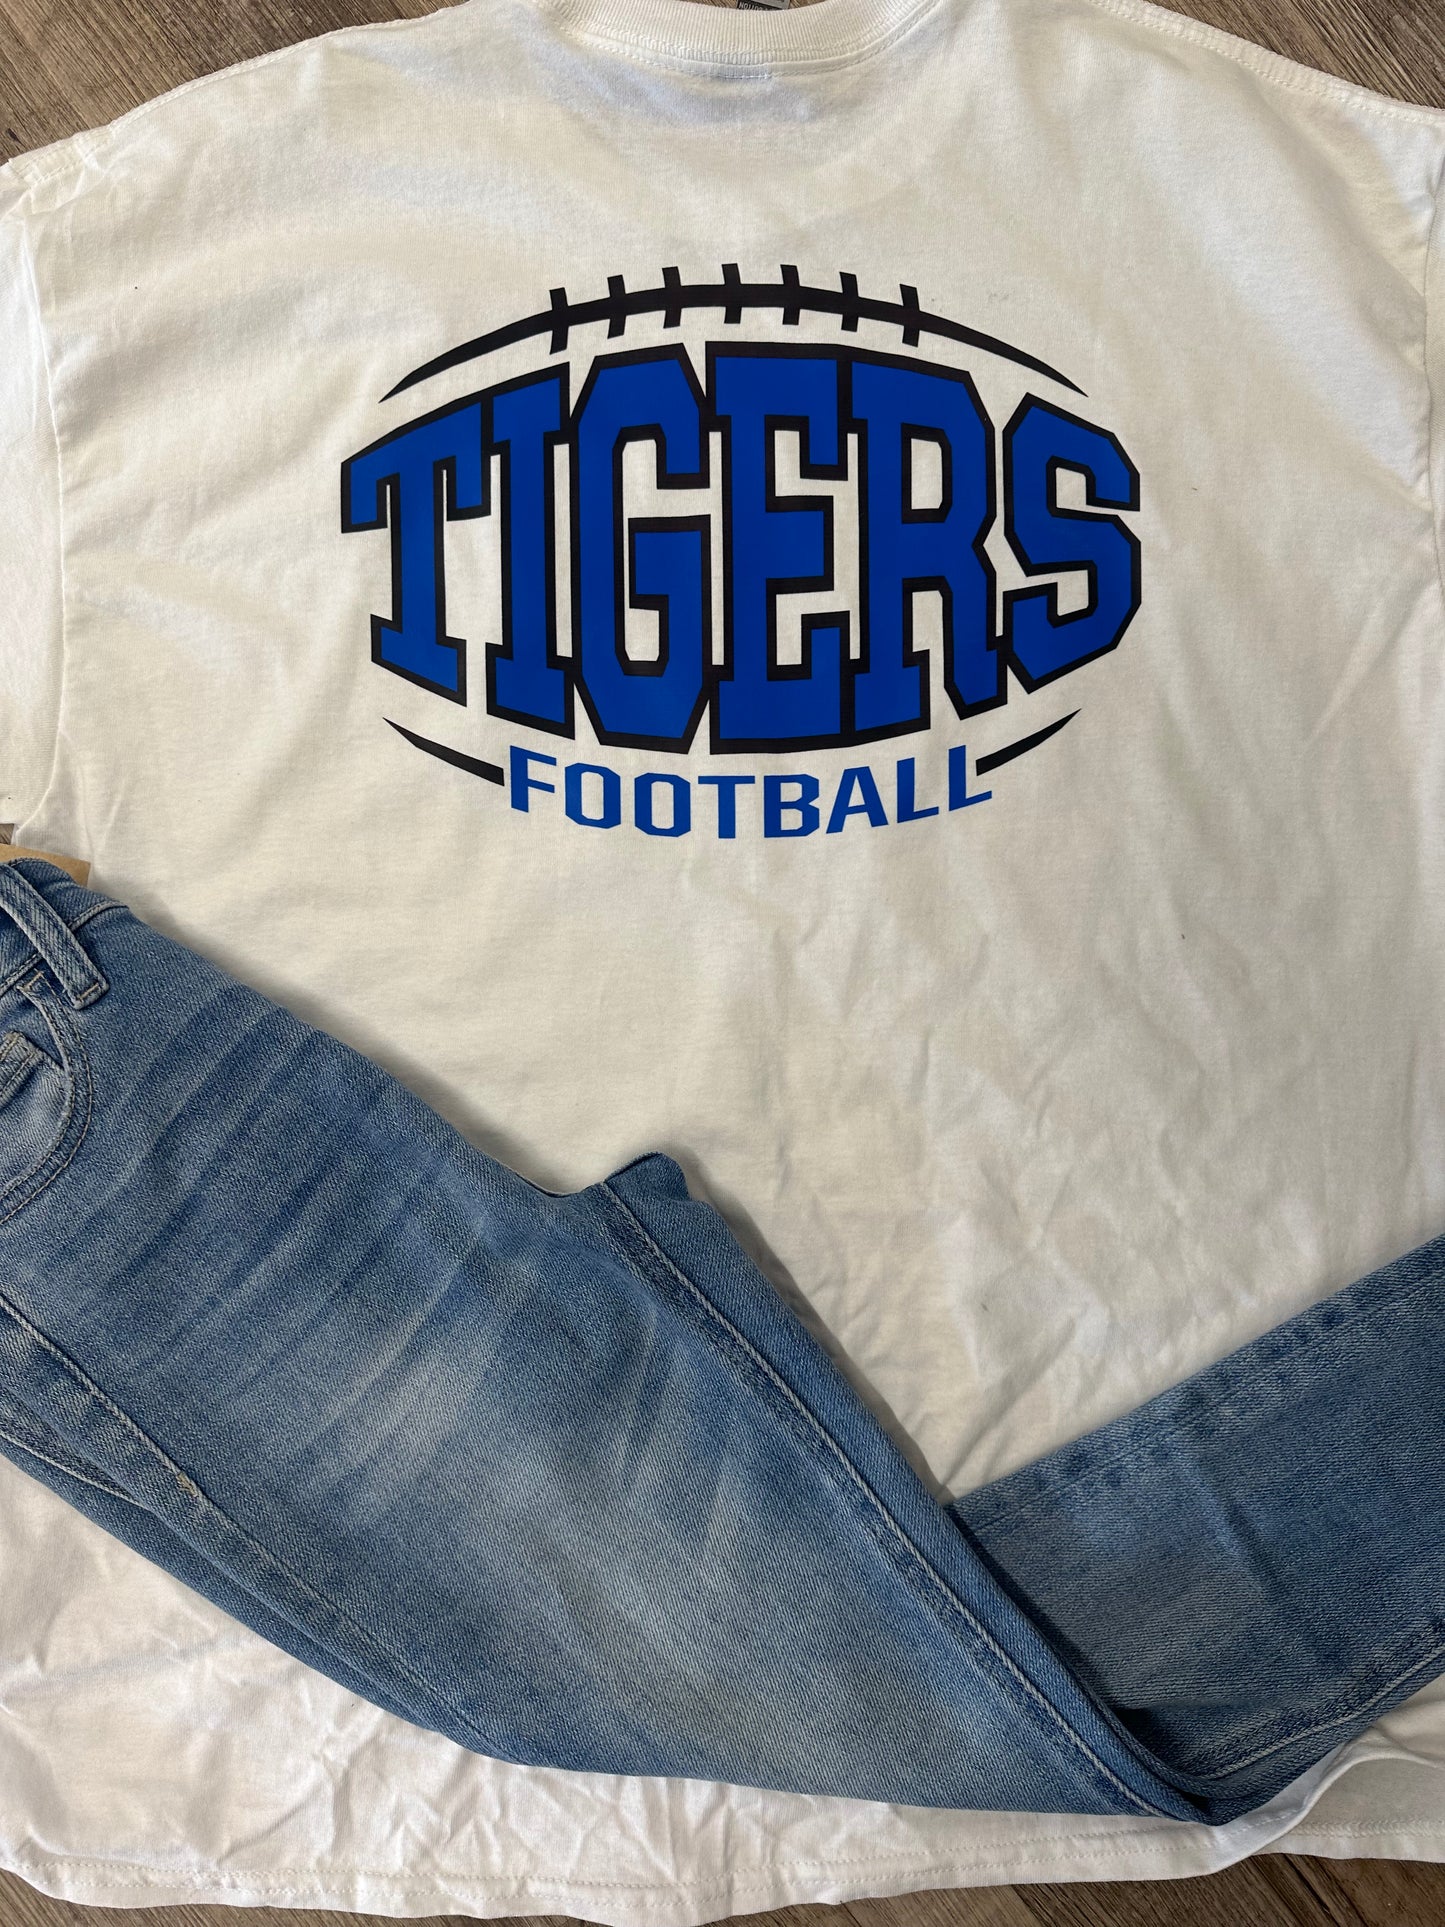 Tigers Football Graphic Tee – Rustic Ruffles Boutique